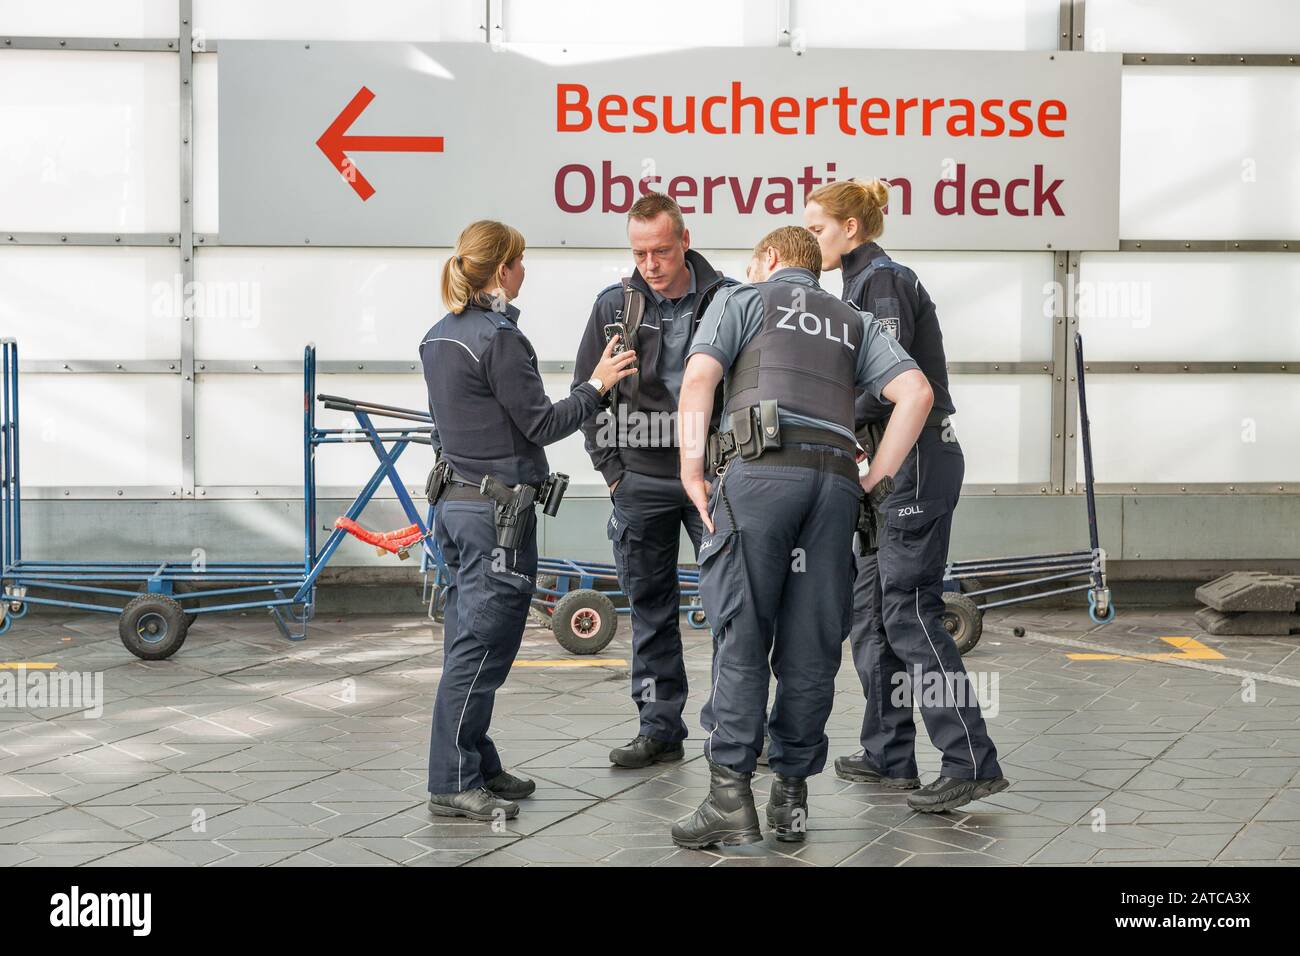 BERLIN, GERMANY - APRIL 20, 2019: German customs patrol with big ZOLL letters on uniform in Tegel airport. Berlin is the capital and largest city of G Stock Photo